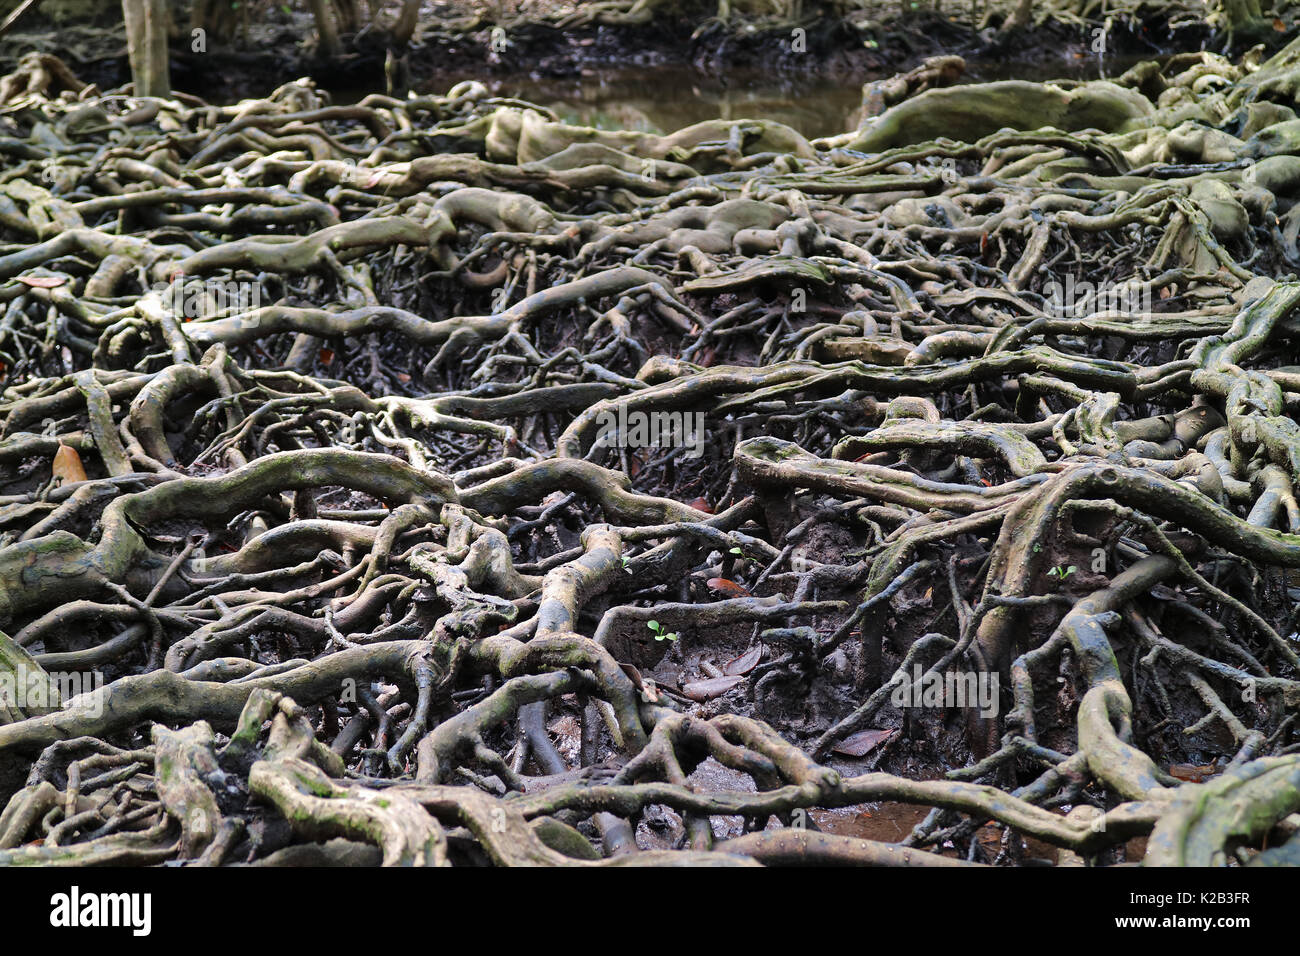 Amazing Mangrove Forest Tree Roots in Trat Province, Thailand Stock Photo